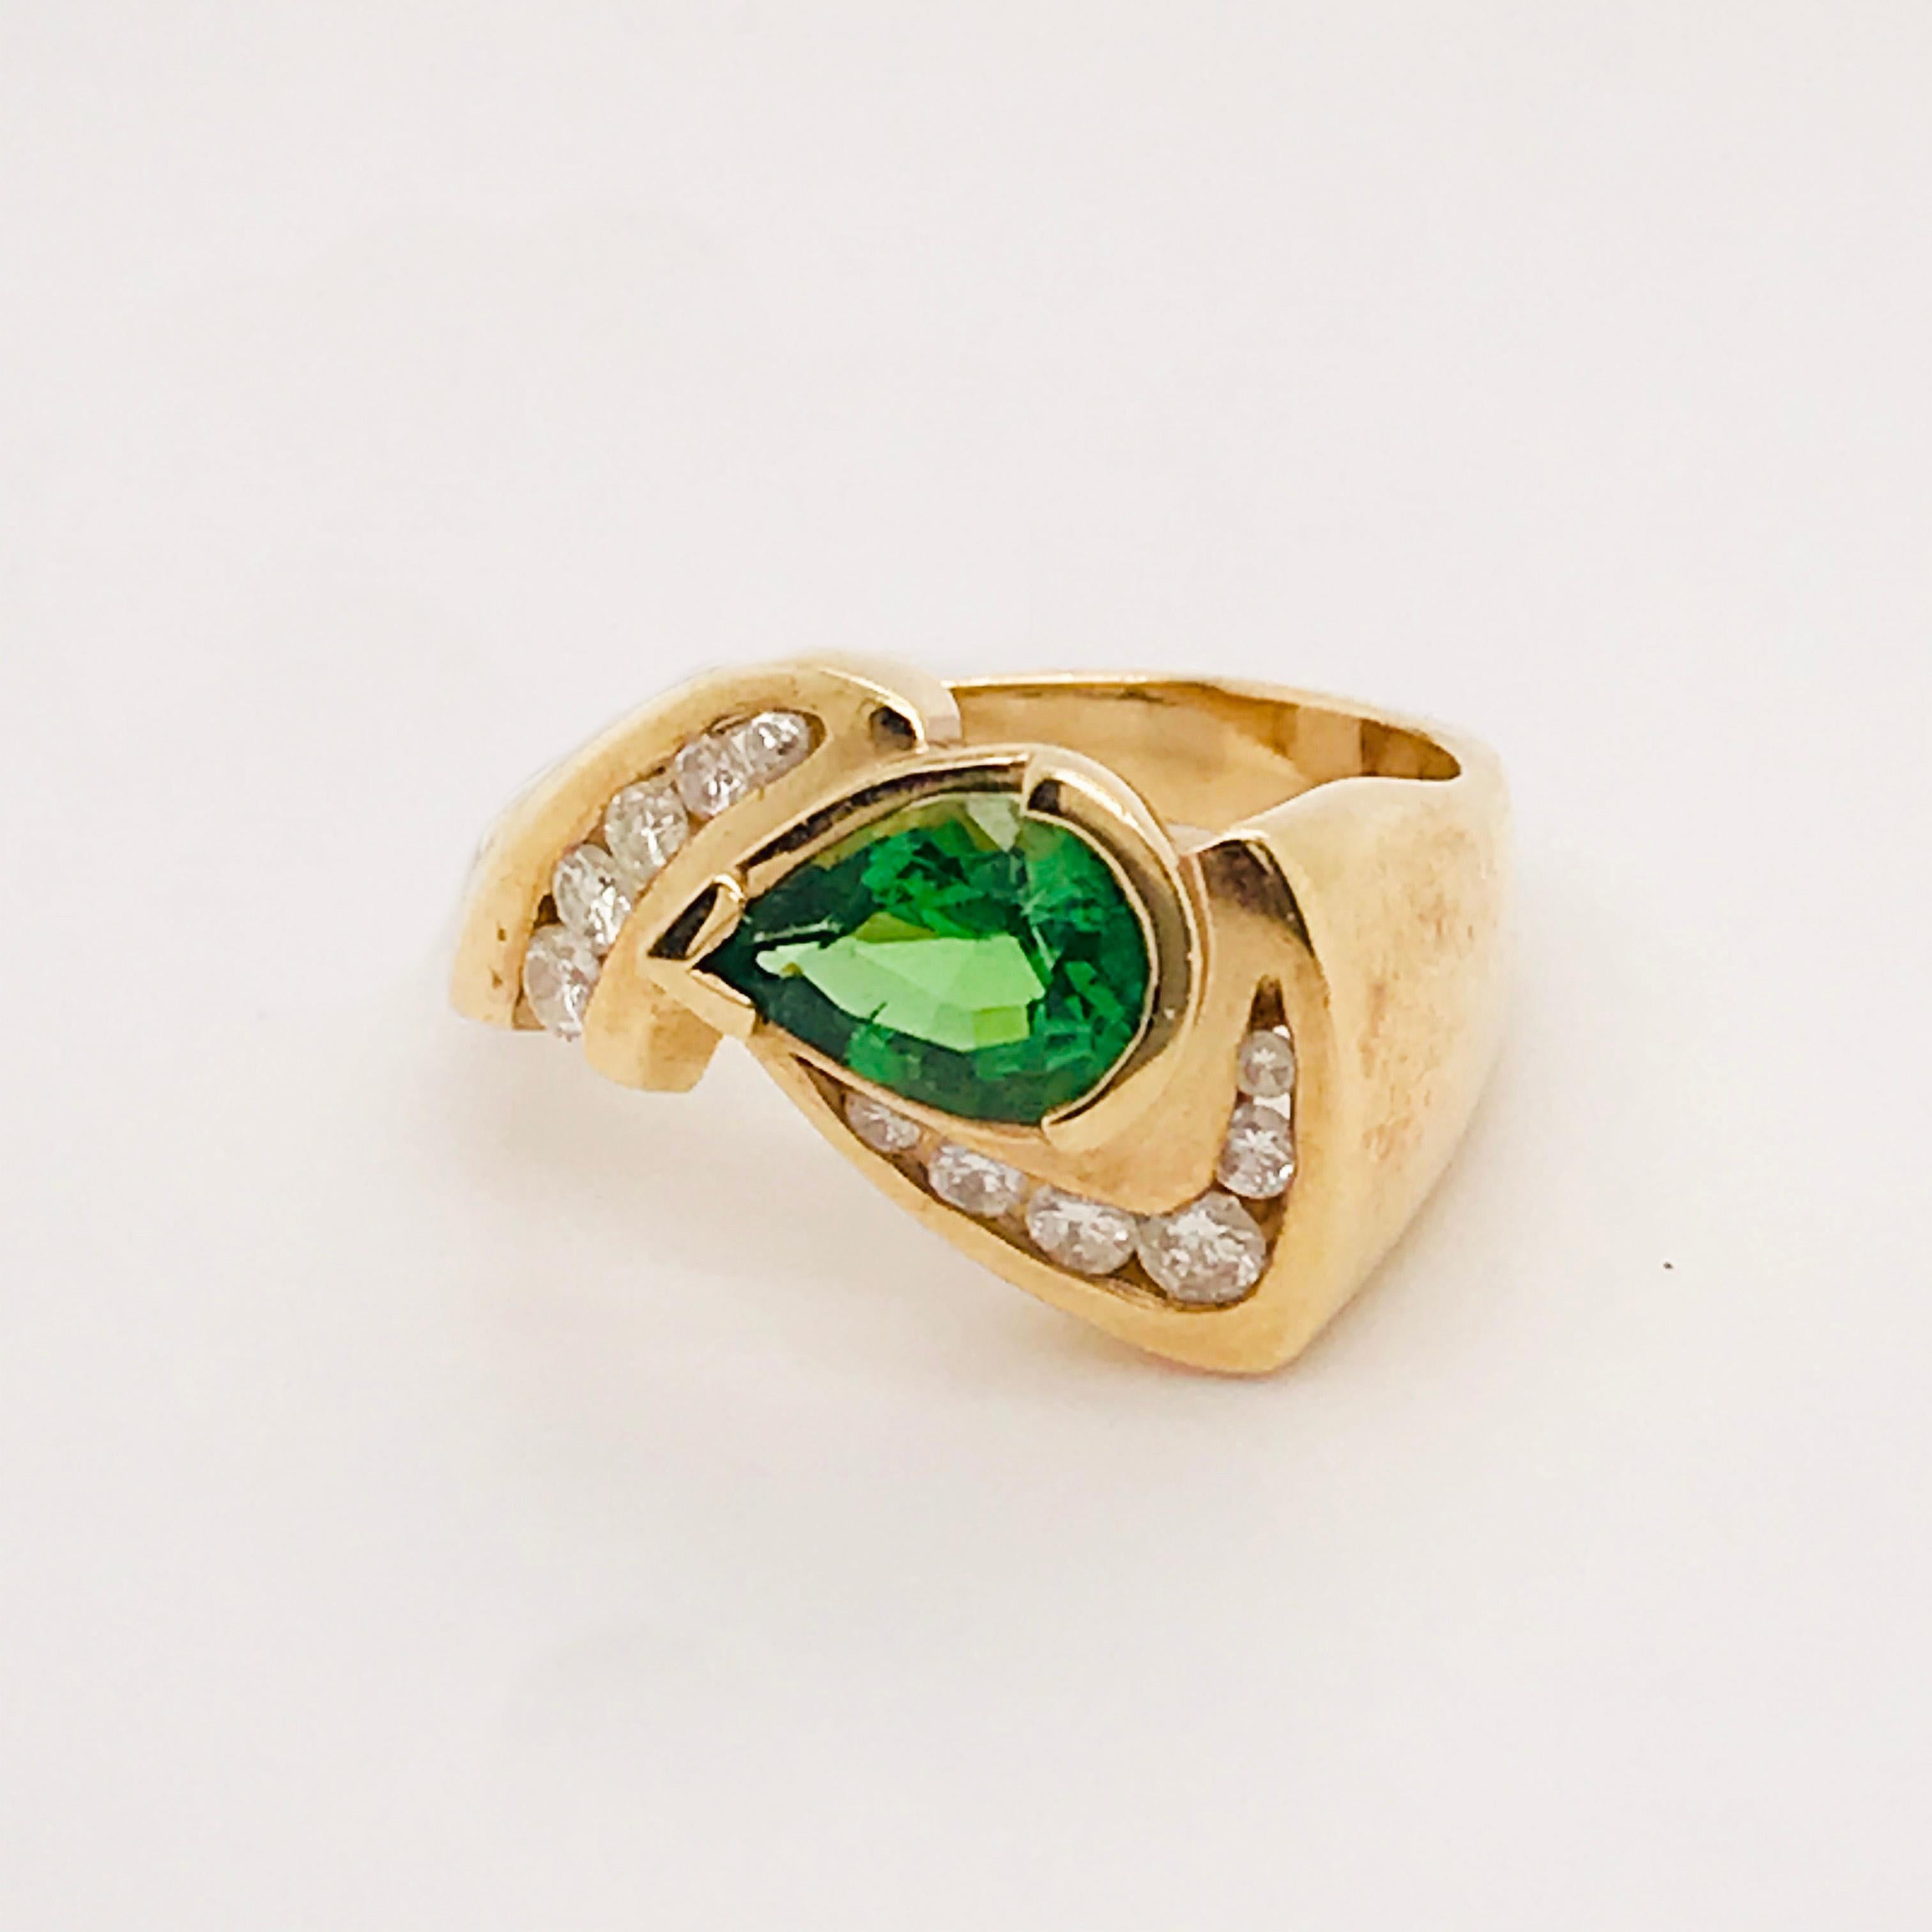 1 ct. Pear Shaped Green Chrome Tourmaline and Diamond Custom Ring 14 Karat Gold In New Condition For Sale In Austin, TX